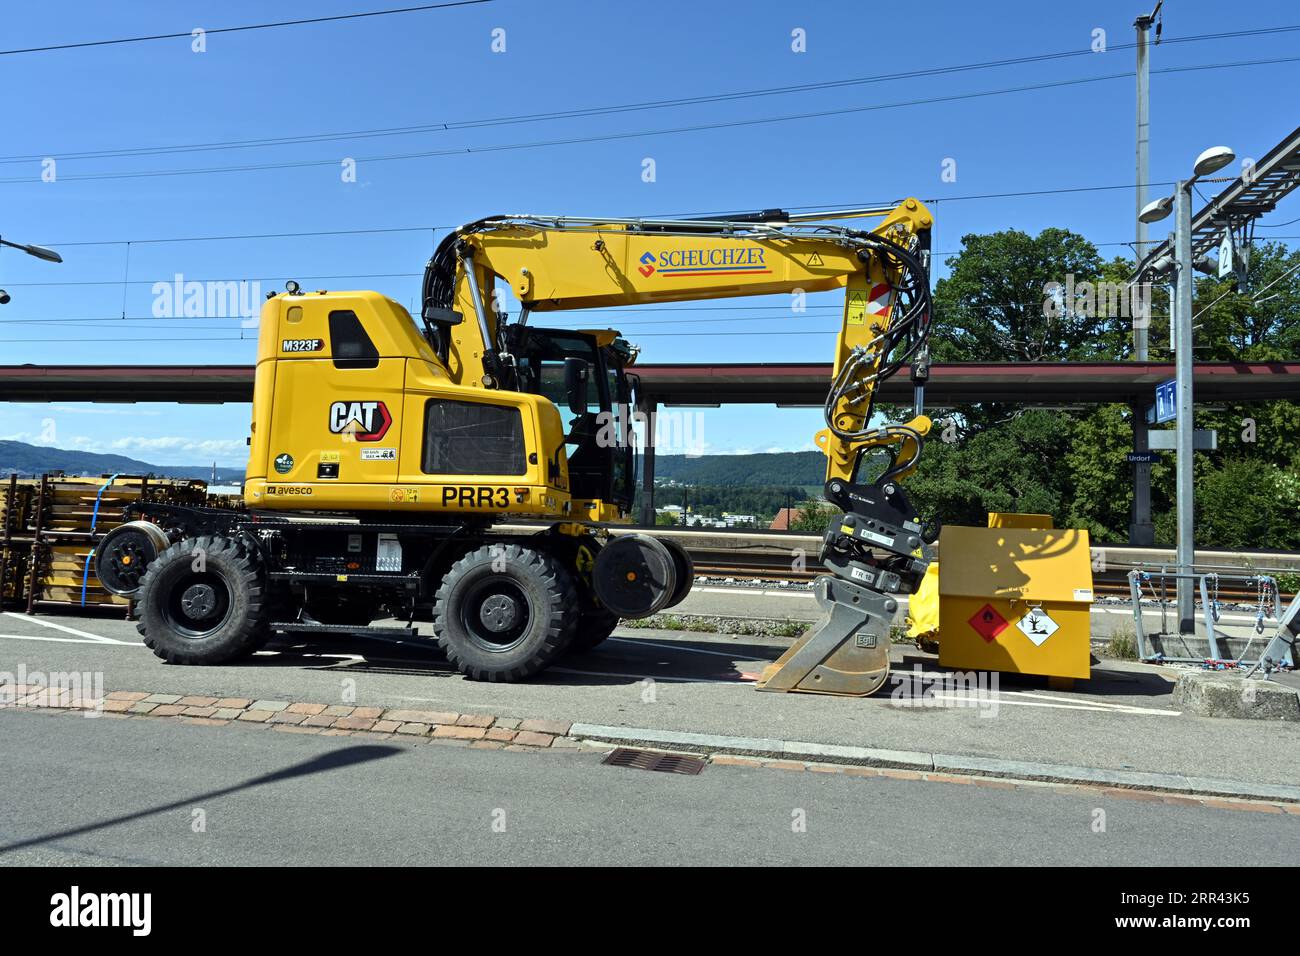 Road-Rail Excavator which offers the ability to easily switch from road to rail situated near construction site. Stock Photo